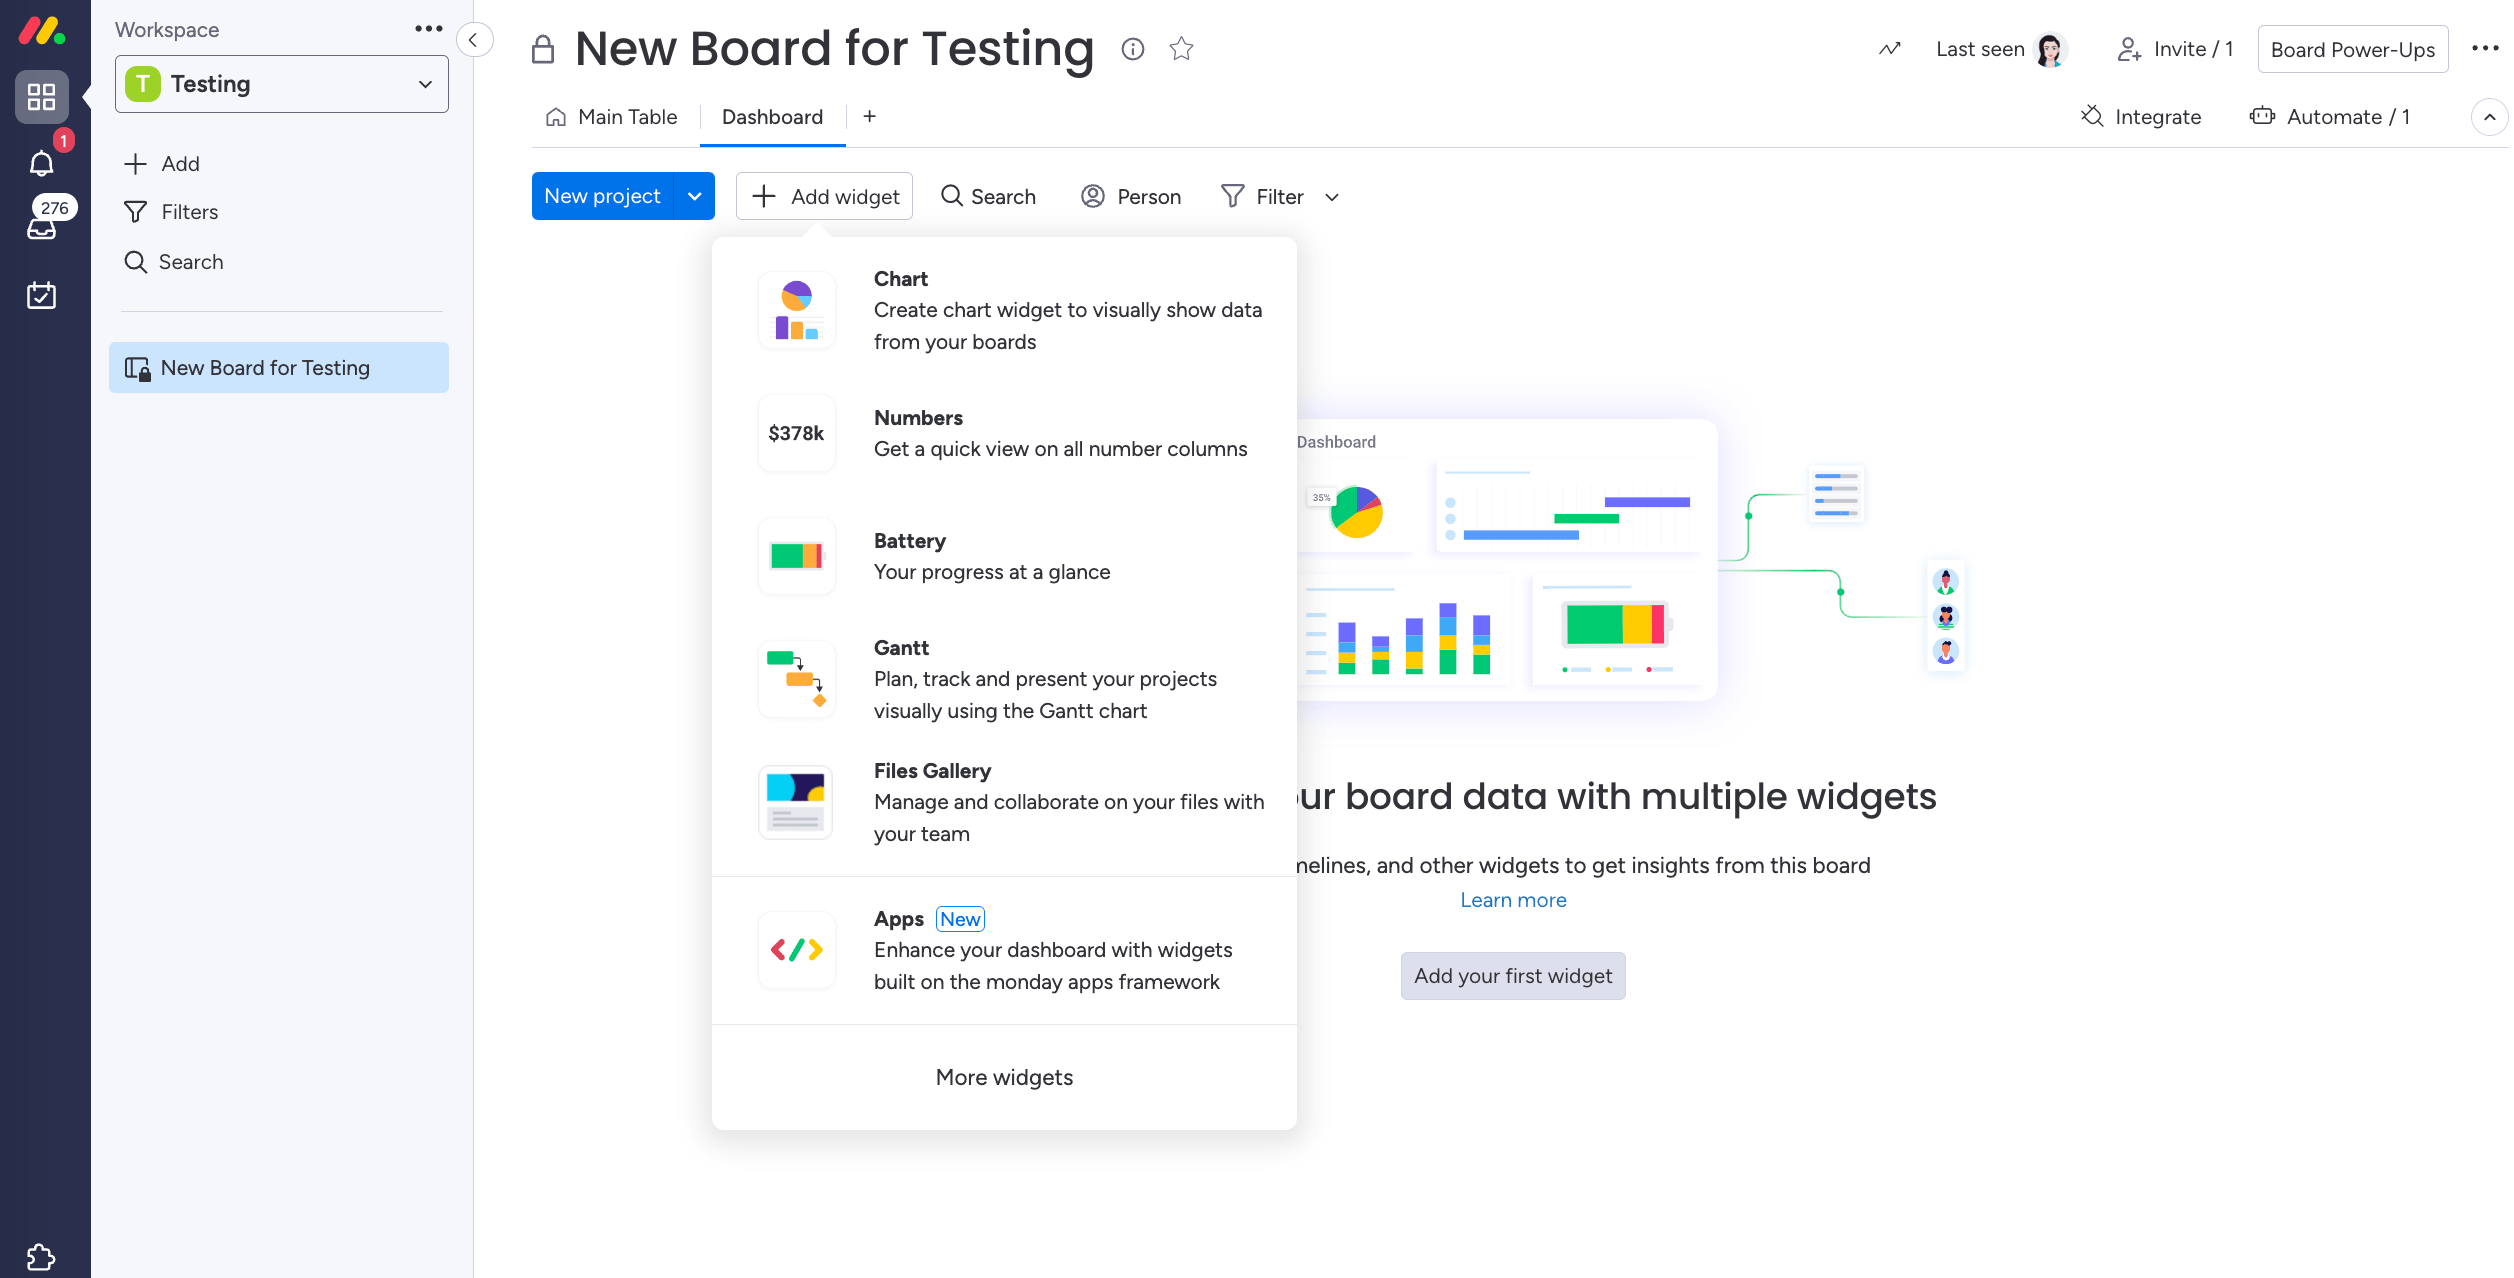 Reports on dashboard